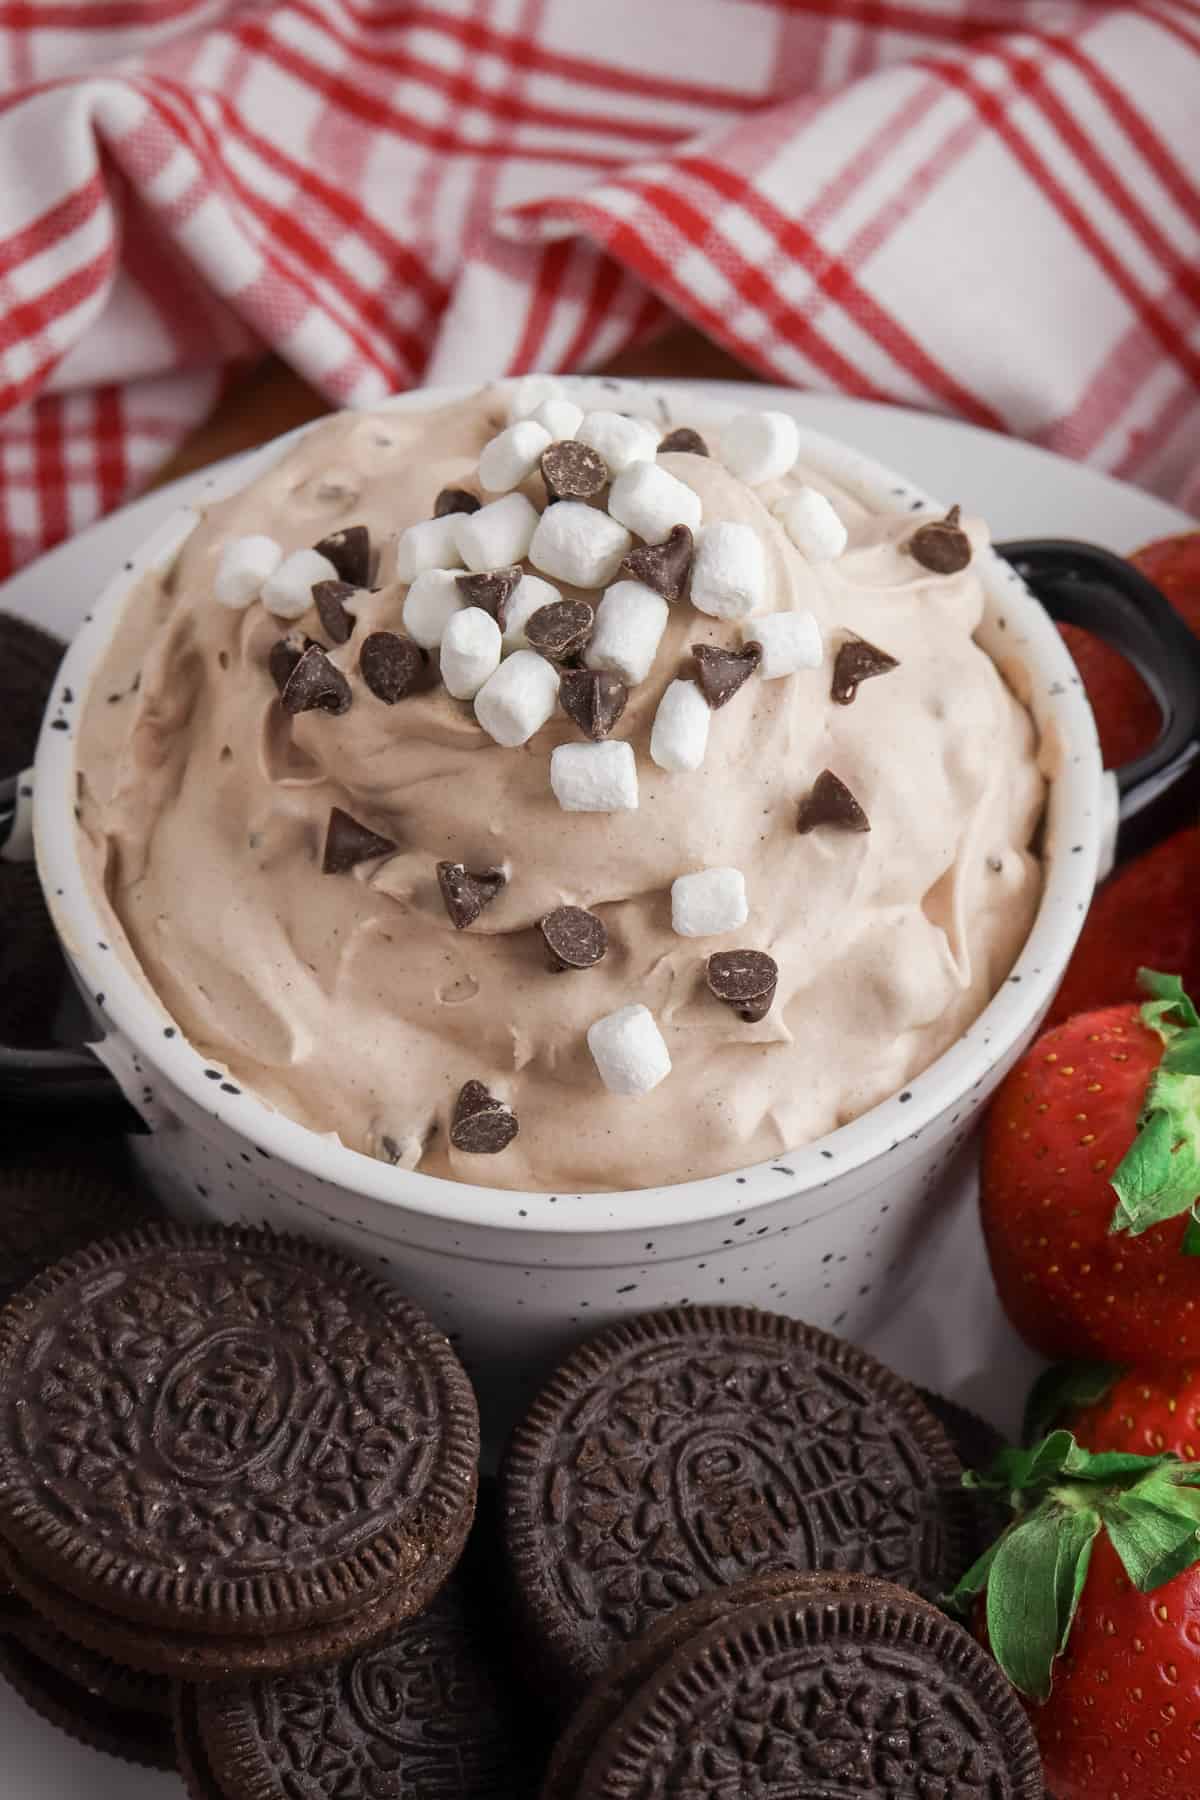 Hot Chocolate Dip topped with chocolate chips and mini marshmallows and served with OREO cookies and strawberries.